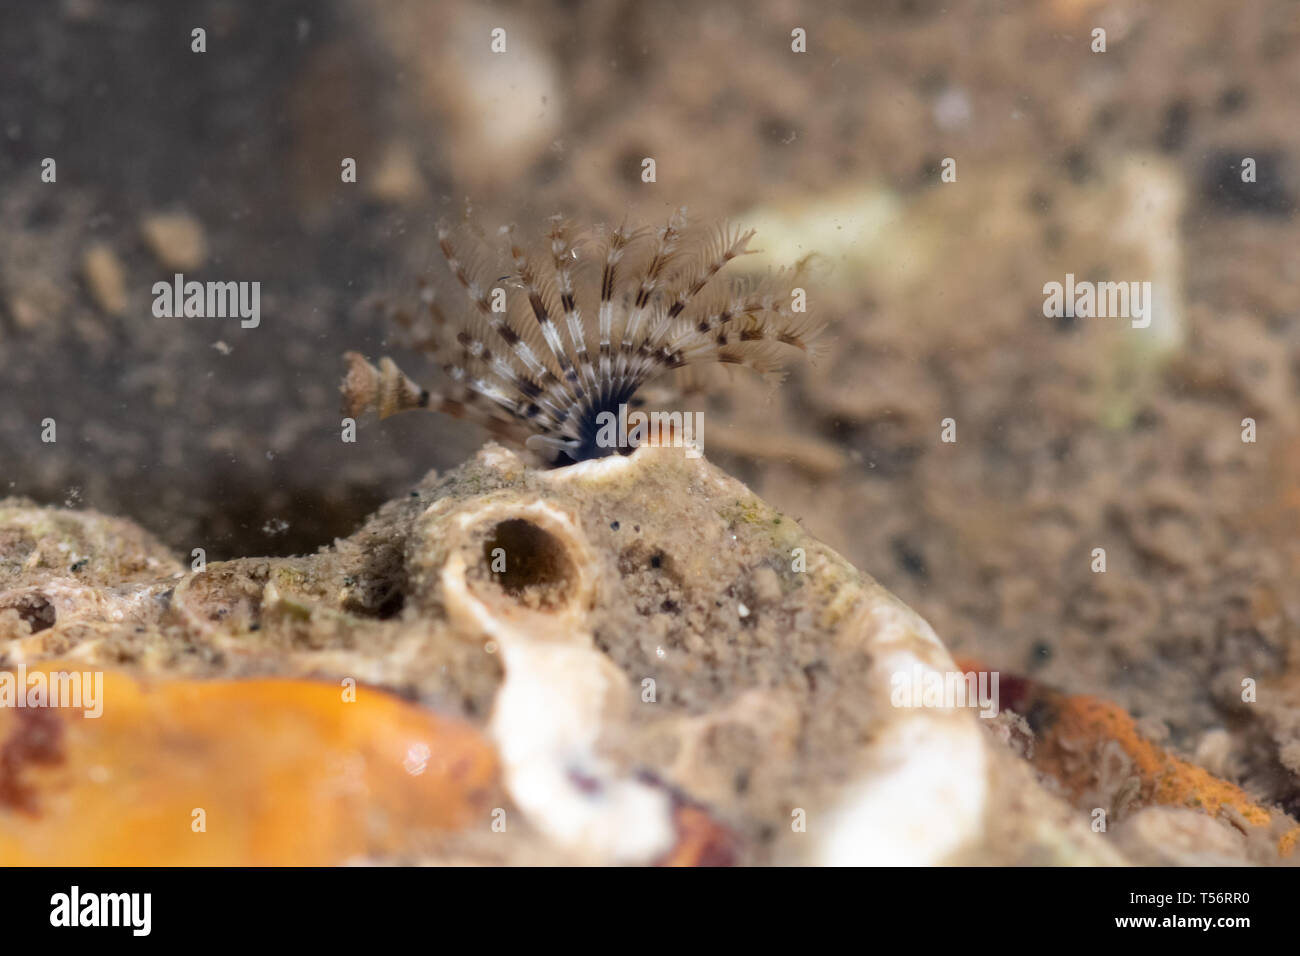 Calcareous tubeworm or fan worm showing feathery feeding tentacles in the intertidal zone at Hill Head near Fareham, UK. Marine wildlife. Stock Photo